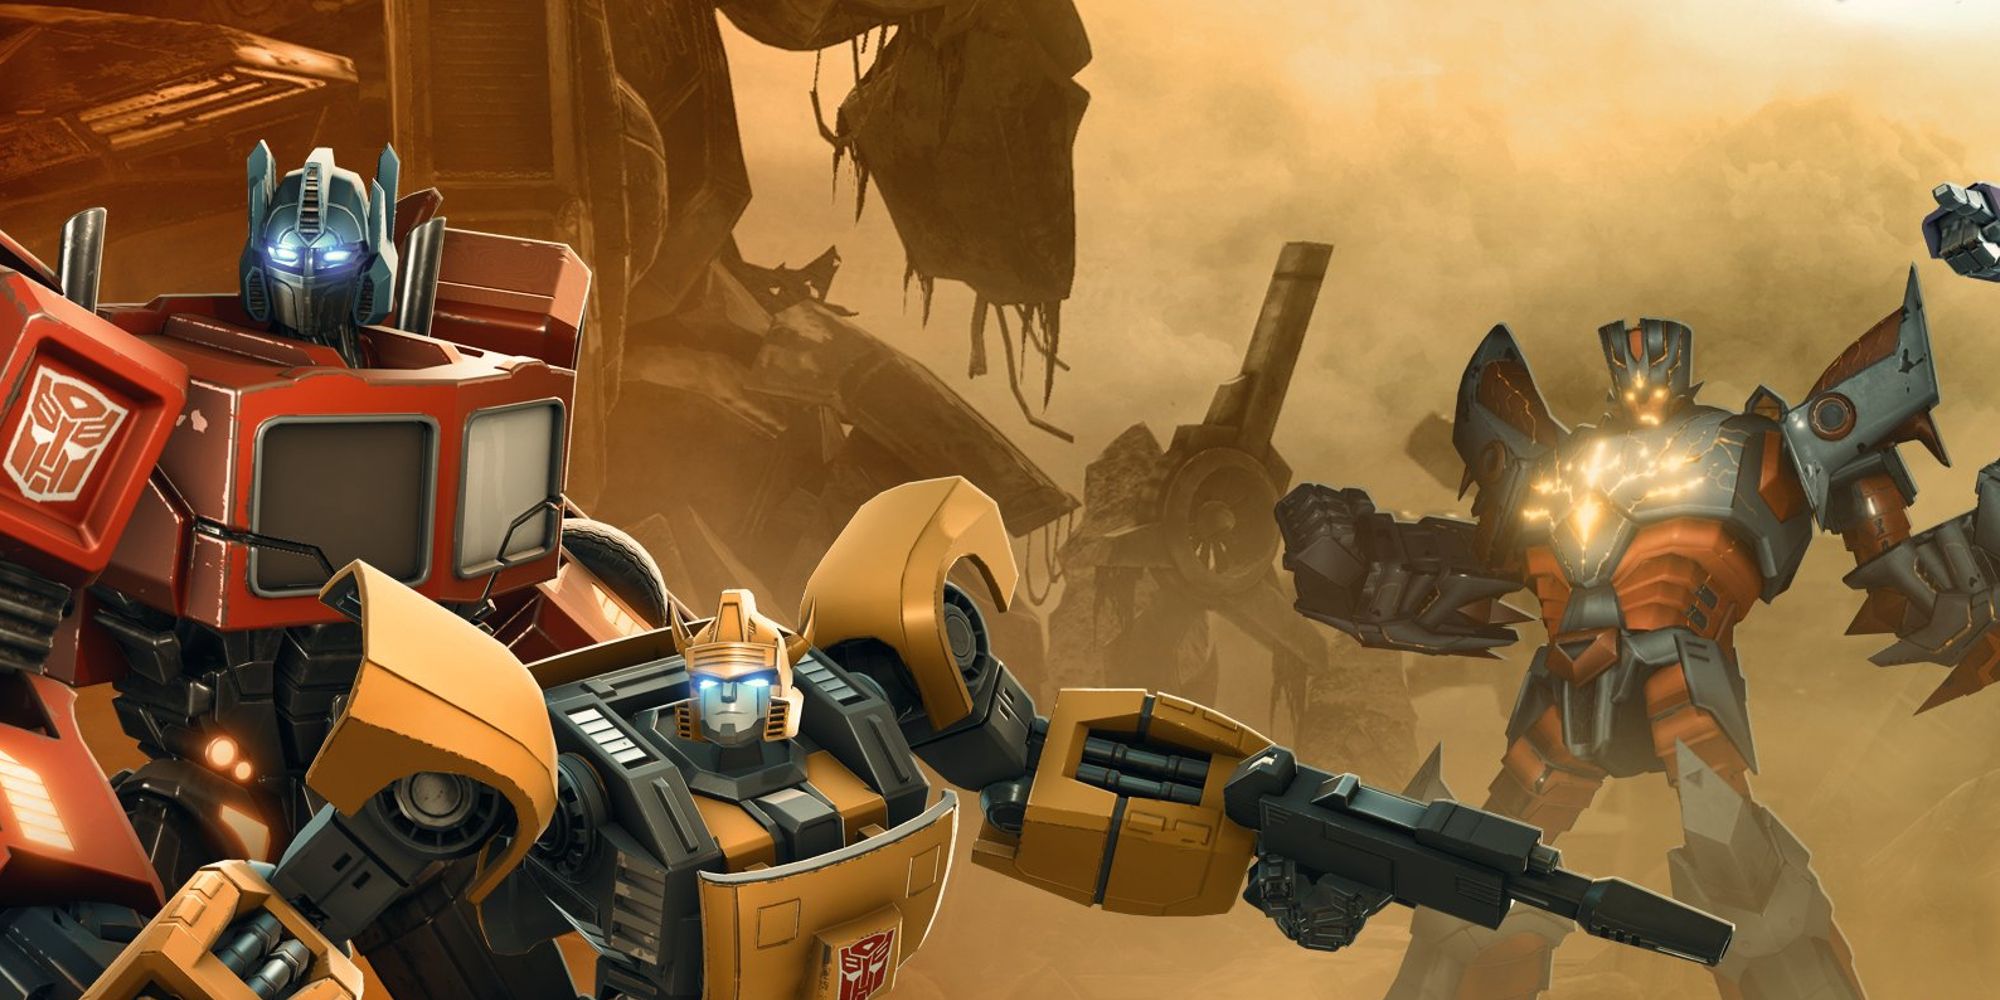 Optimus Prime and Bumblebee in key artwork for Transformers Forged To Fight